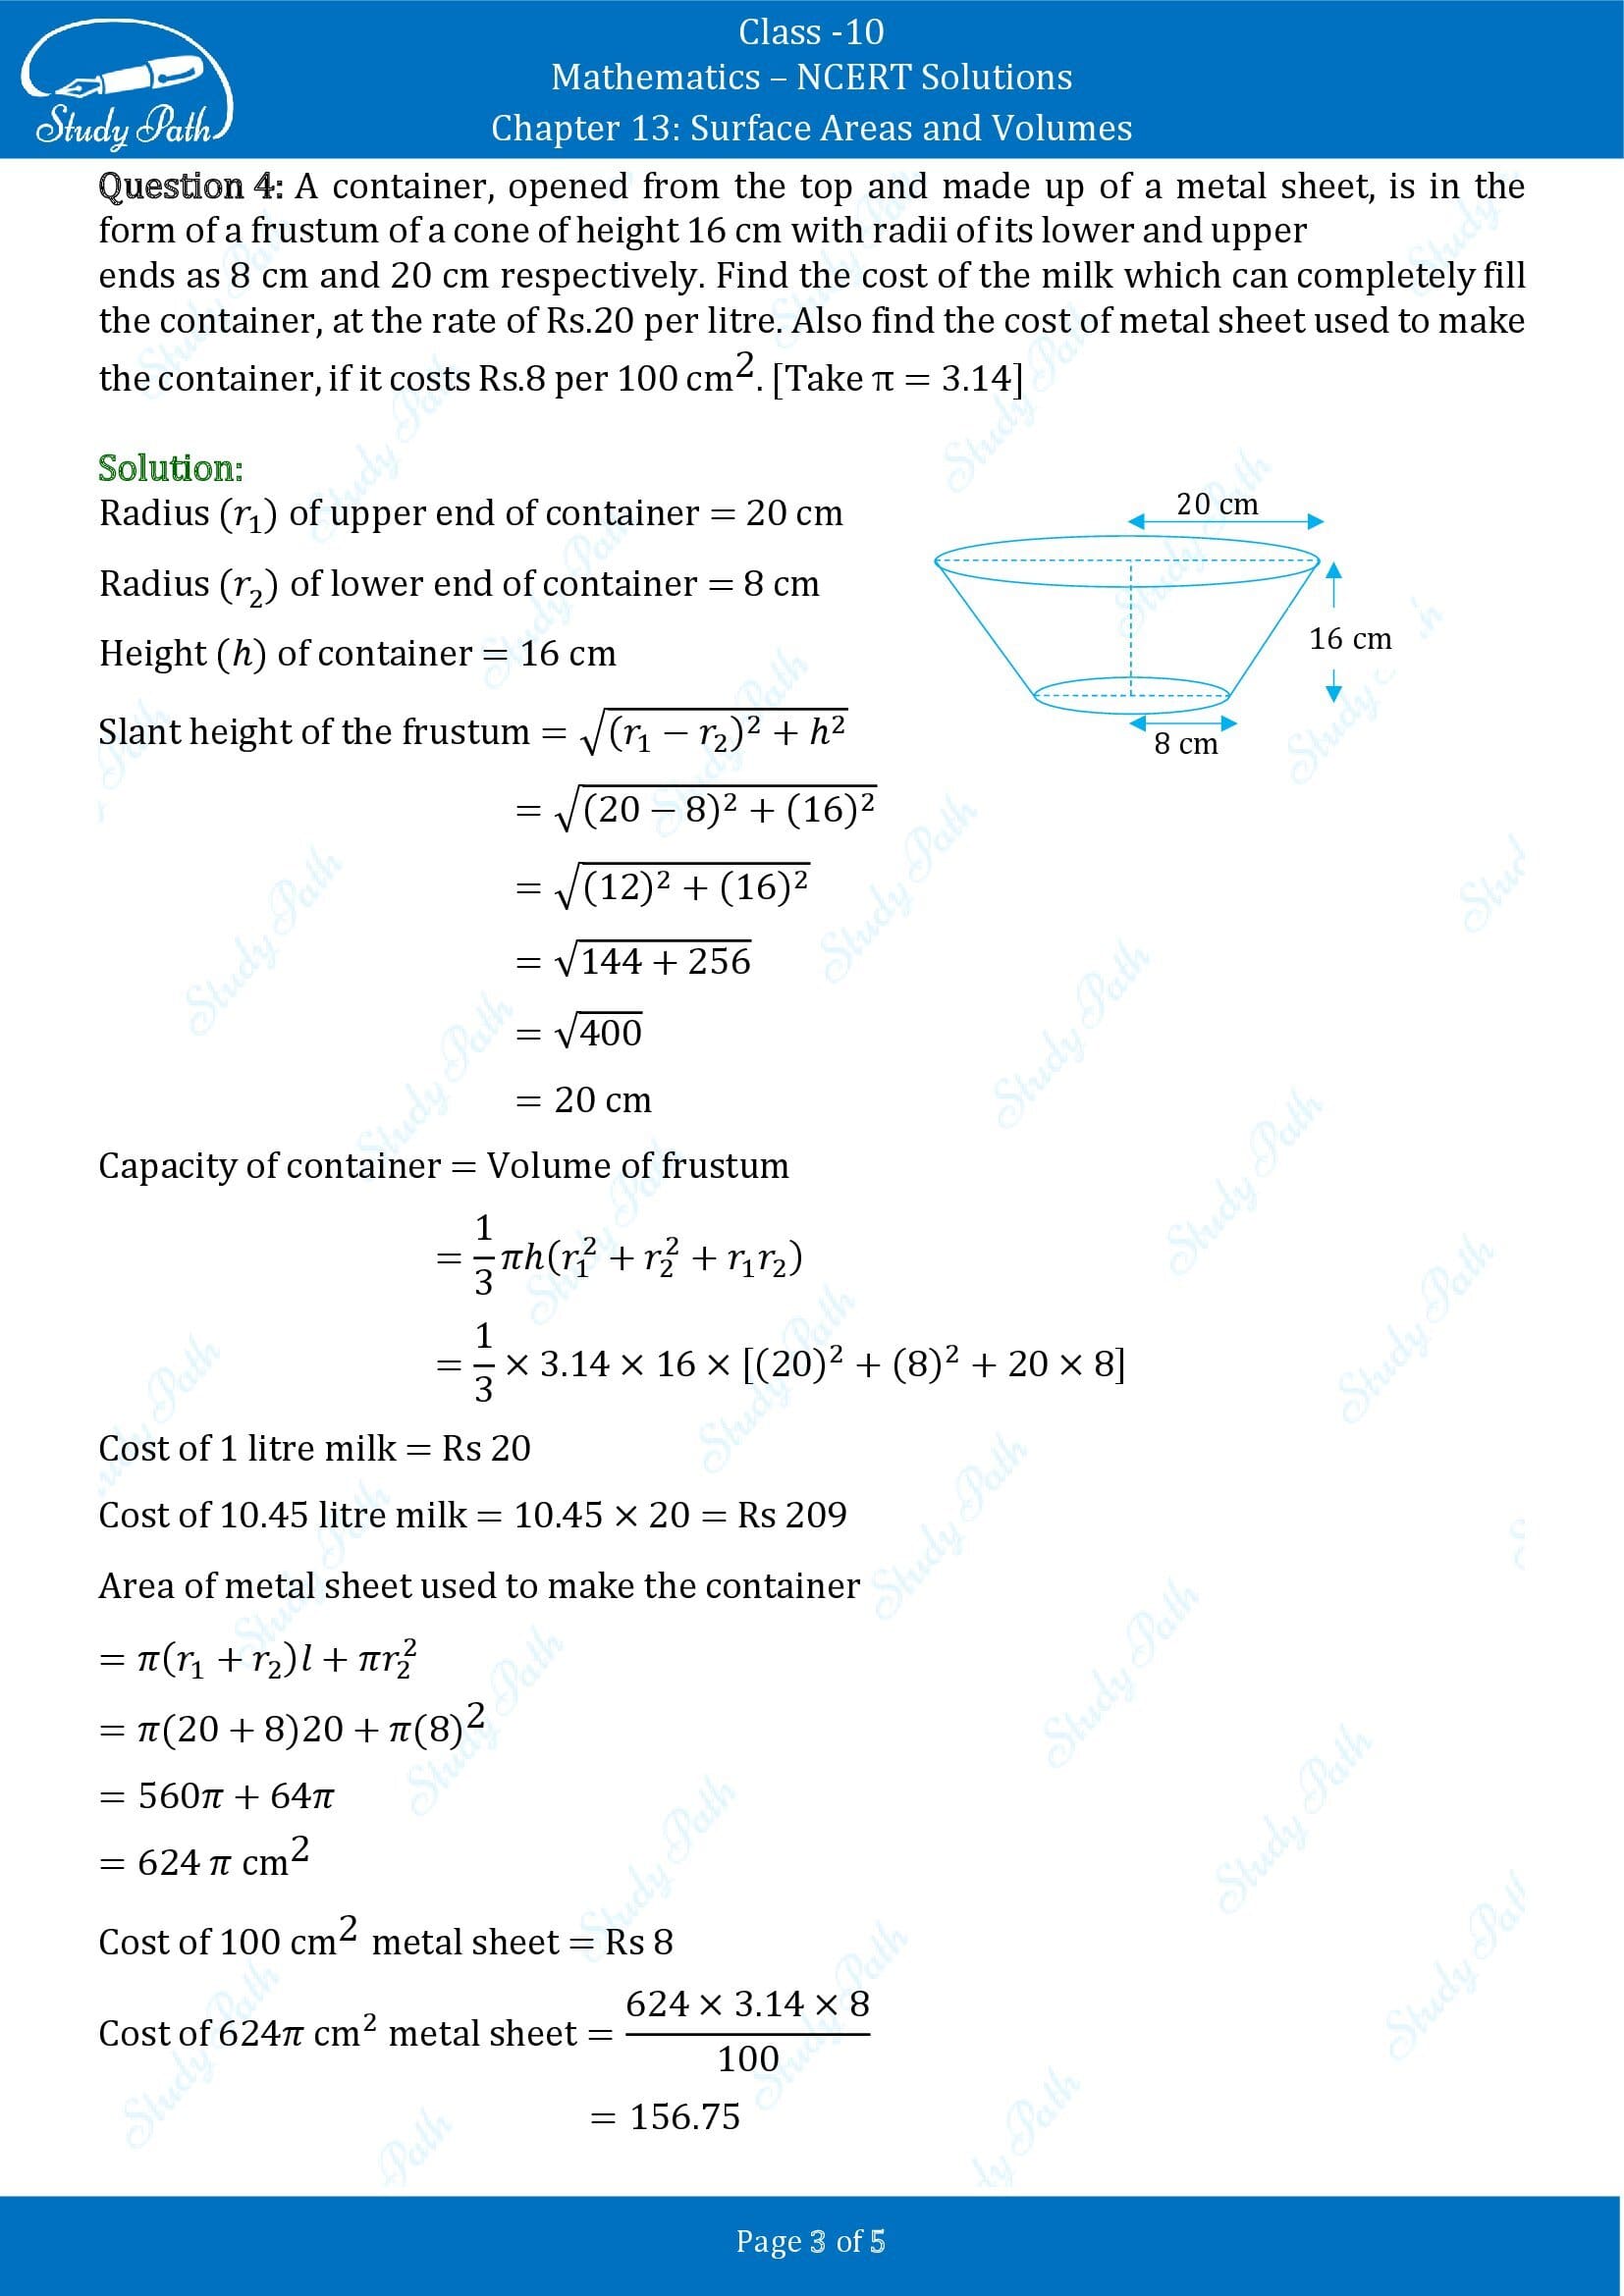 NCERT Solutions for Class 10 Maths Chapter 13 Surface Areas and Volumes Exercise 13.4 00003